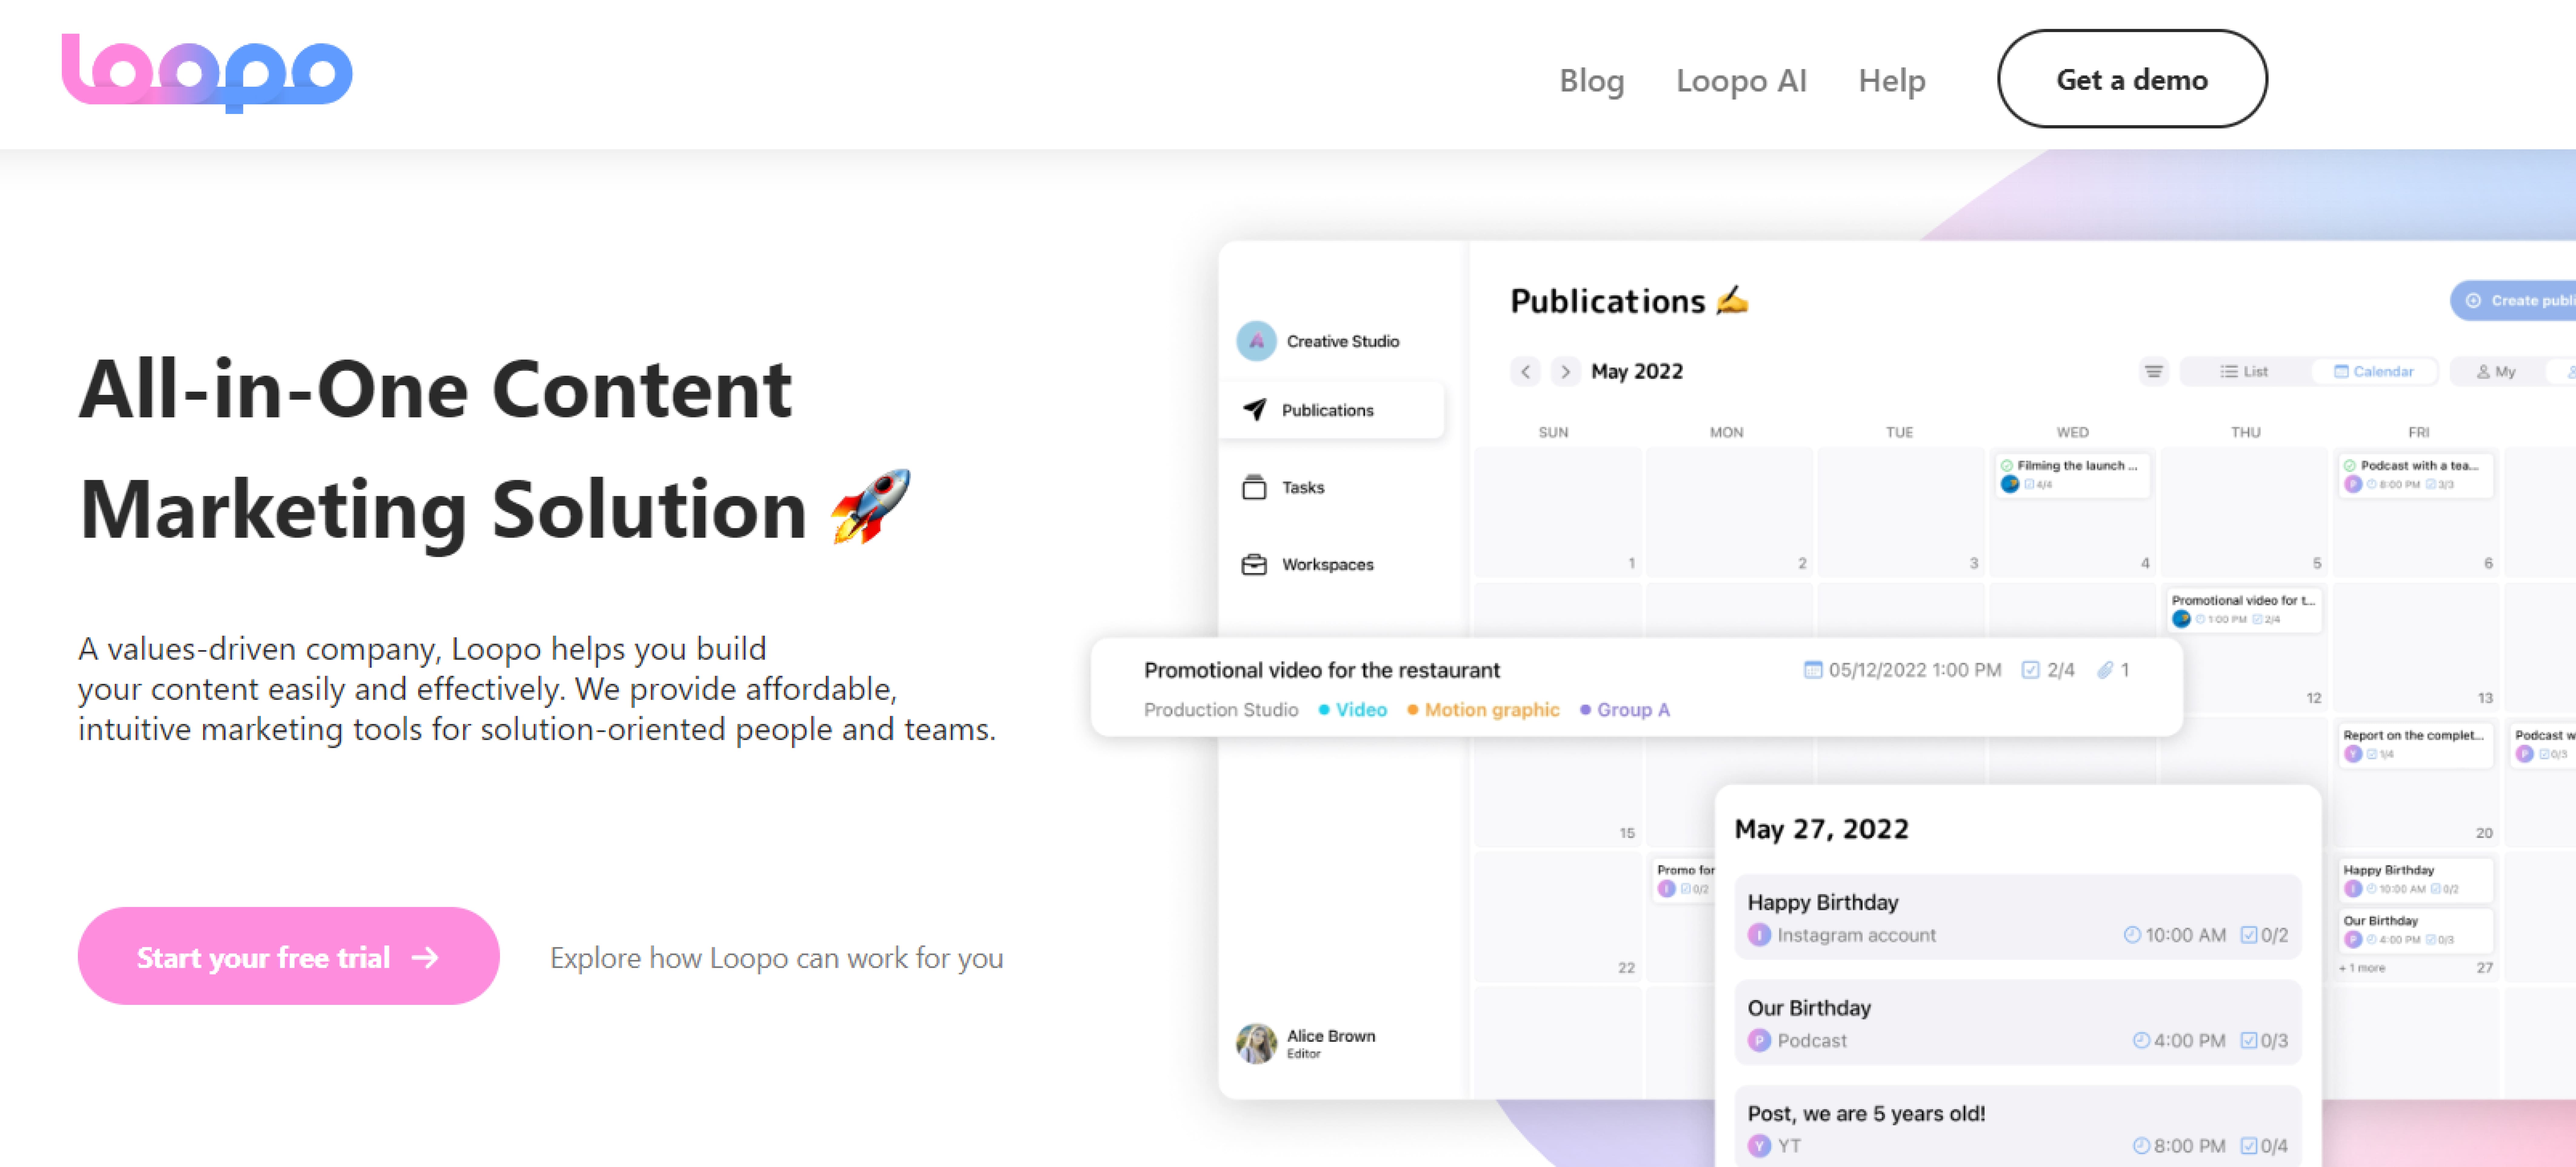 Loopo is a great tool for content marketing